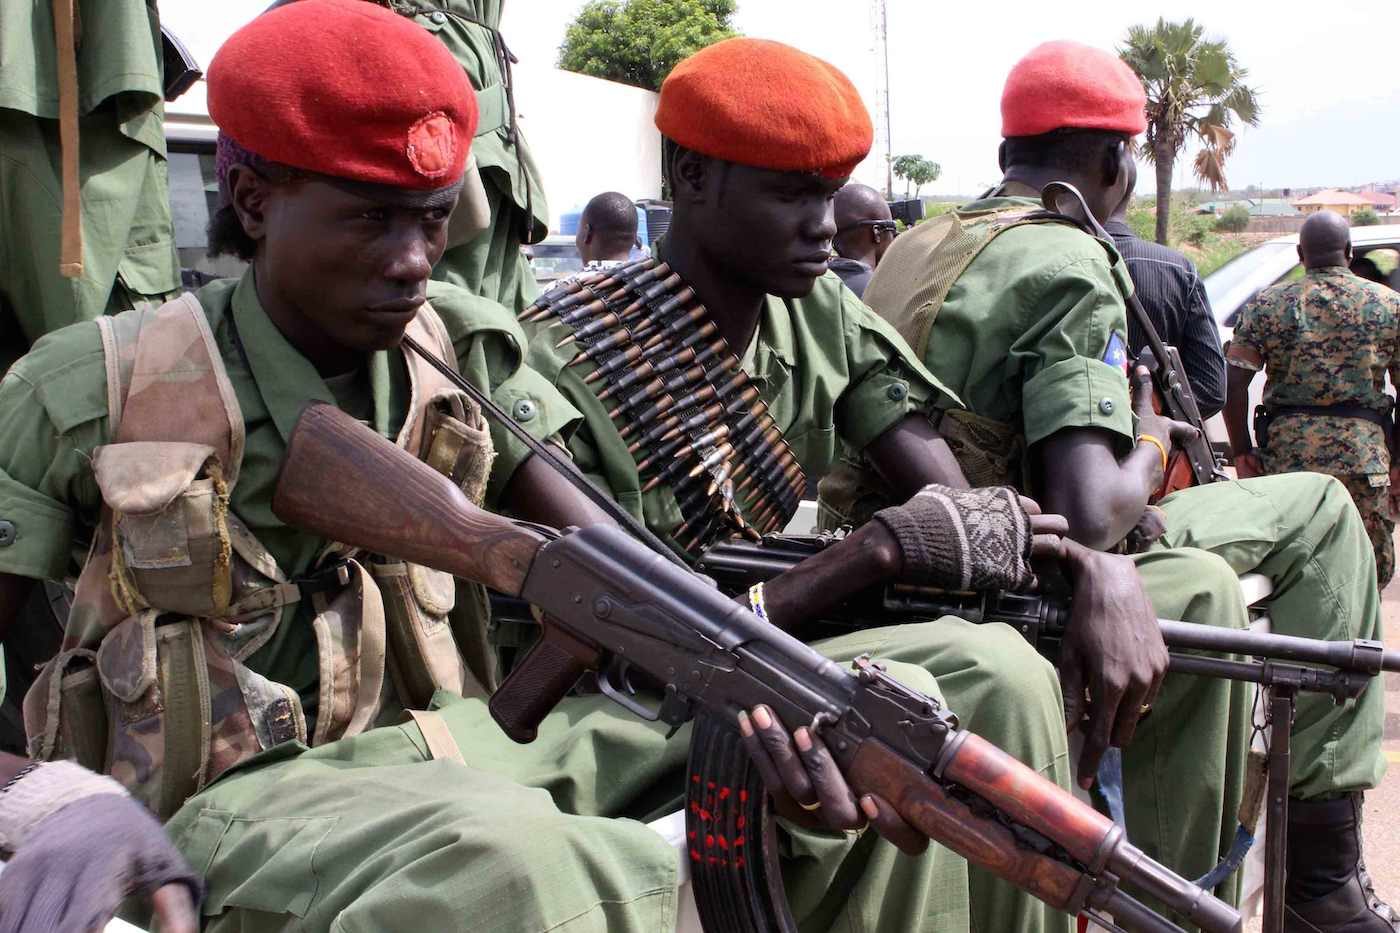 Ceasefire declared after deadly South Sudan clashes